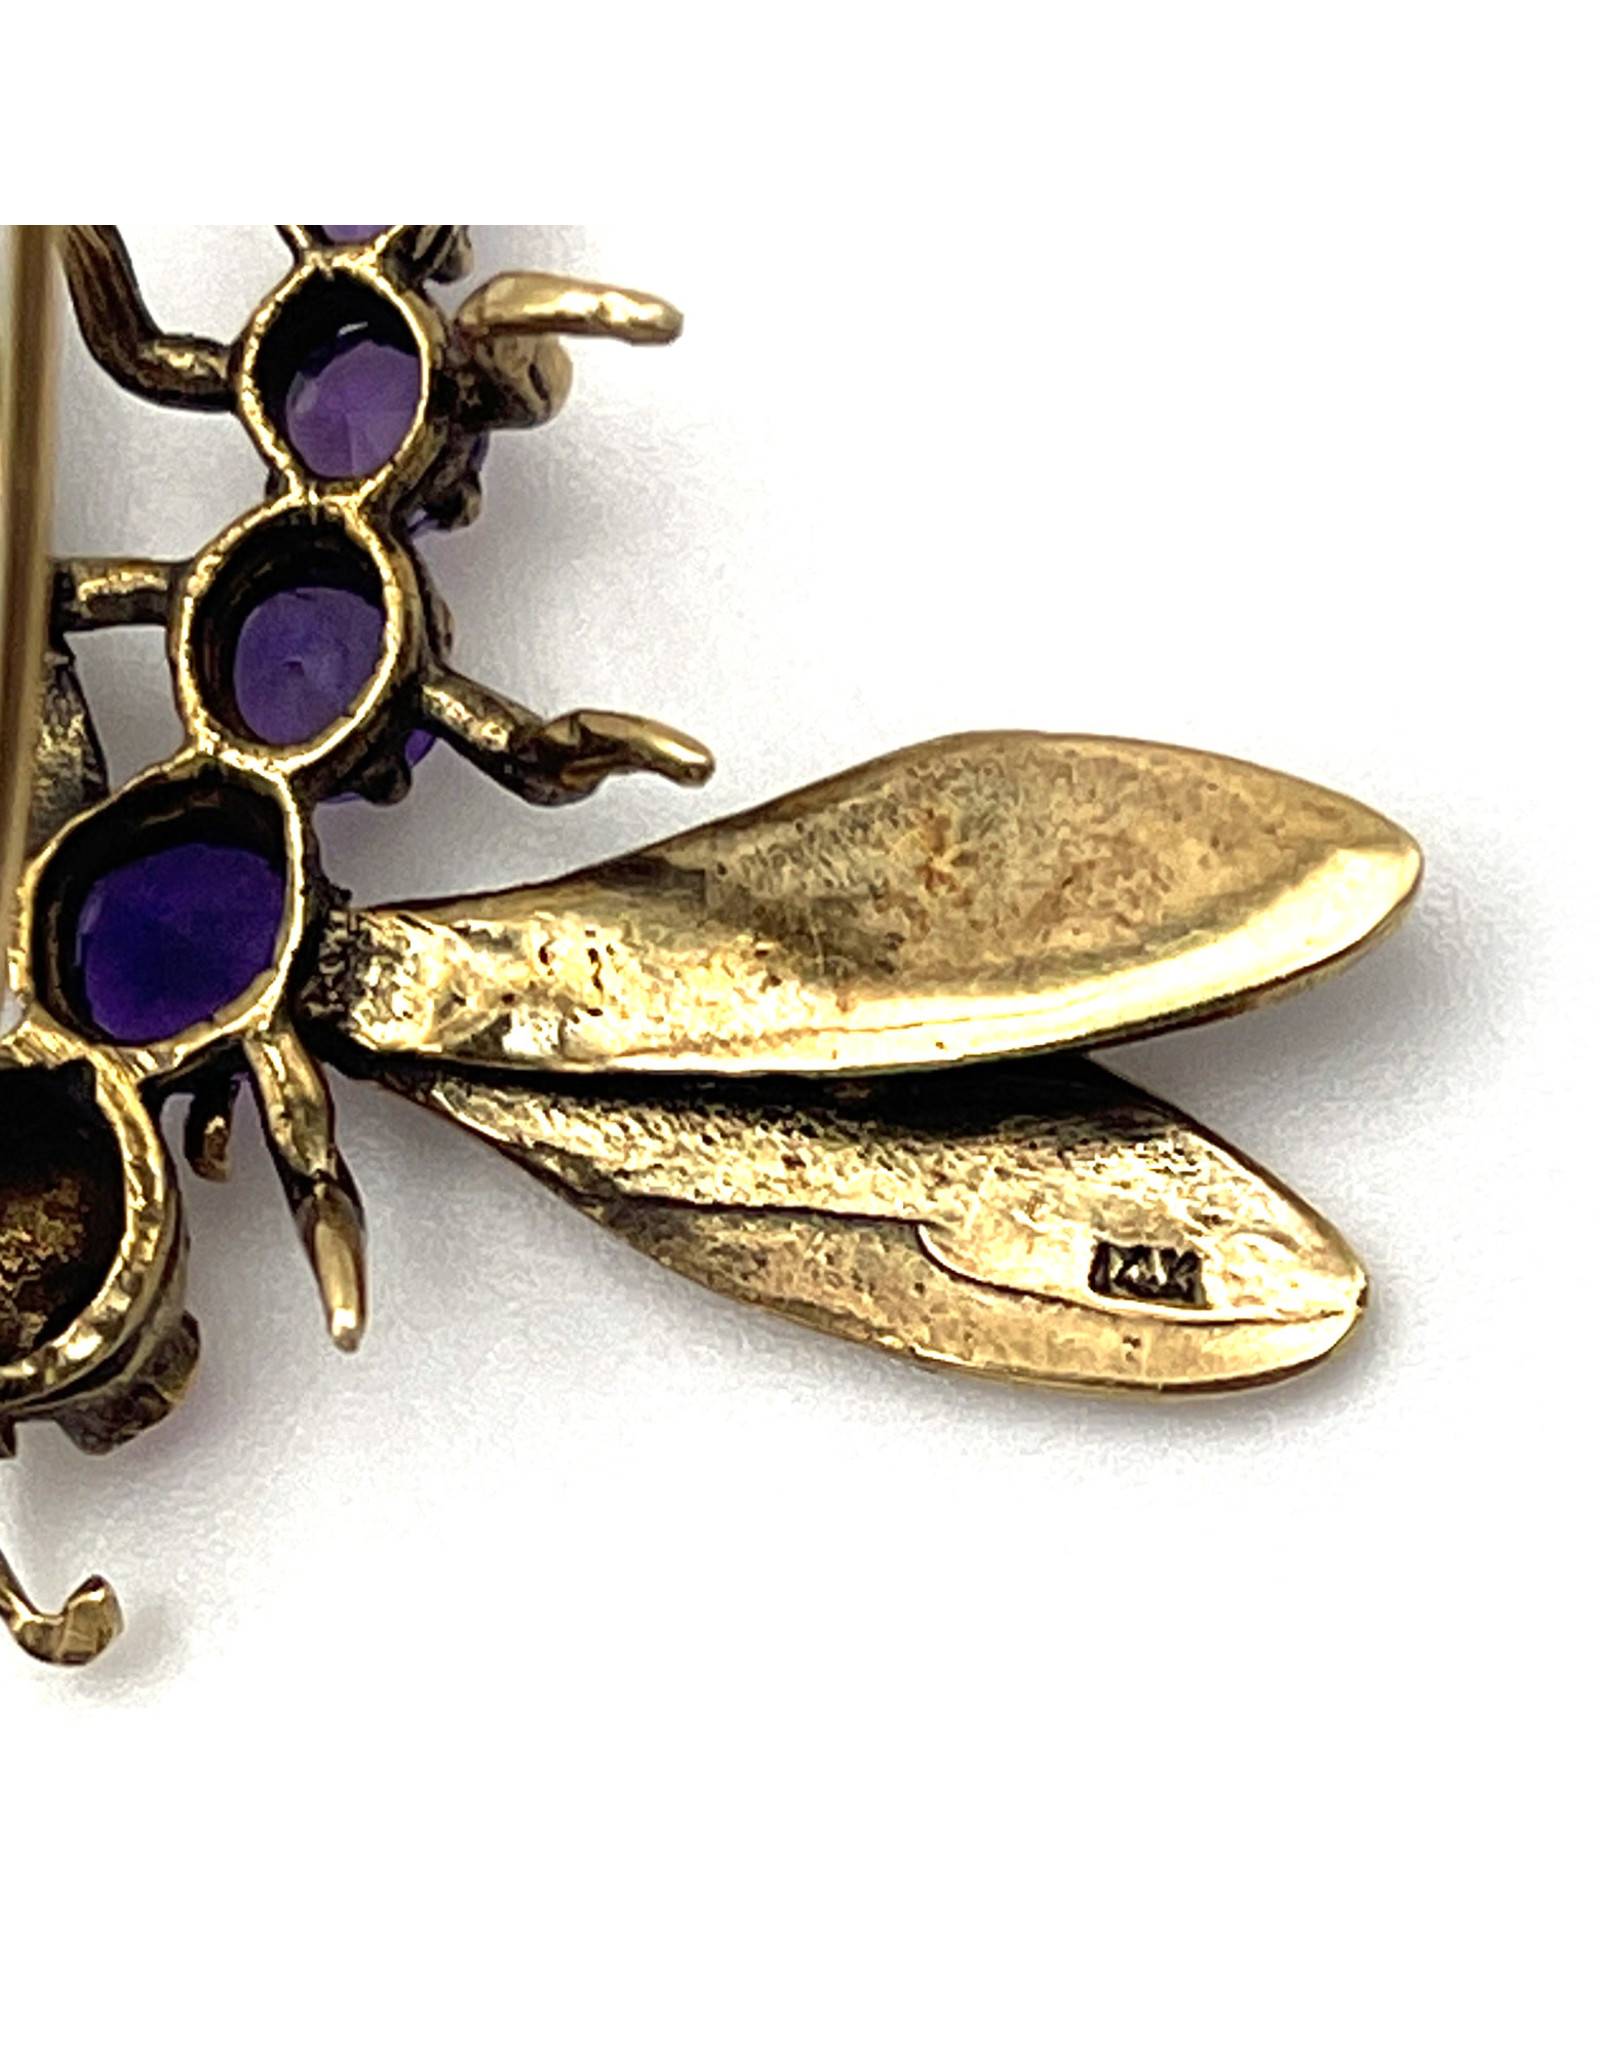 Vintage 14K Gold Dragonfly Brooch with Amethysts and Rubies